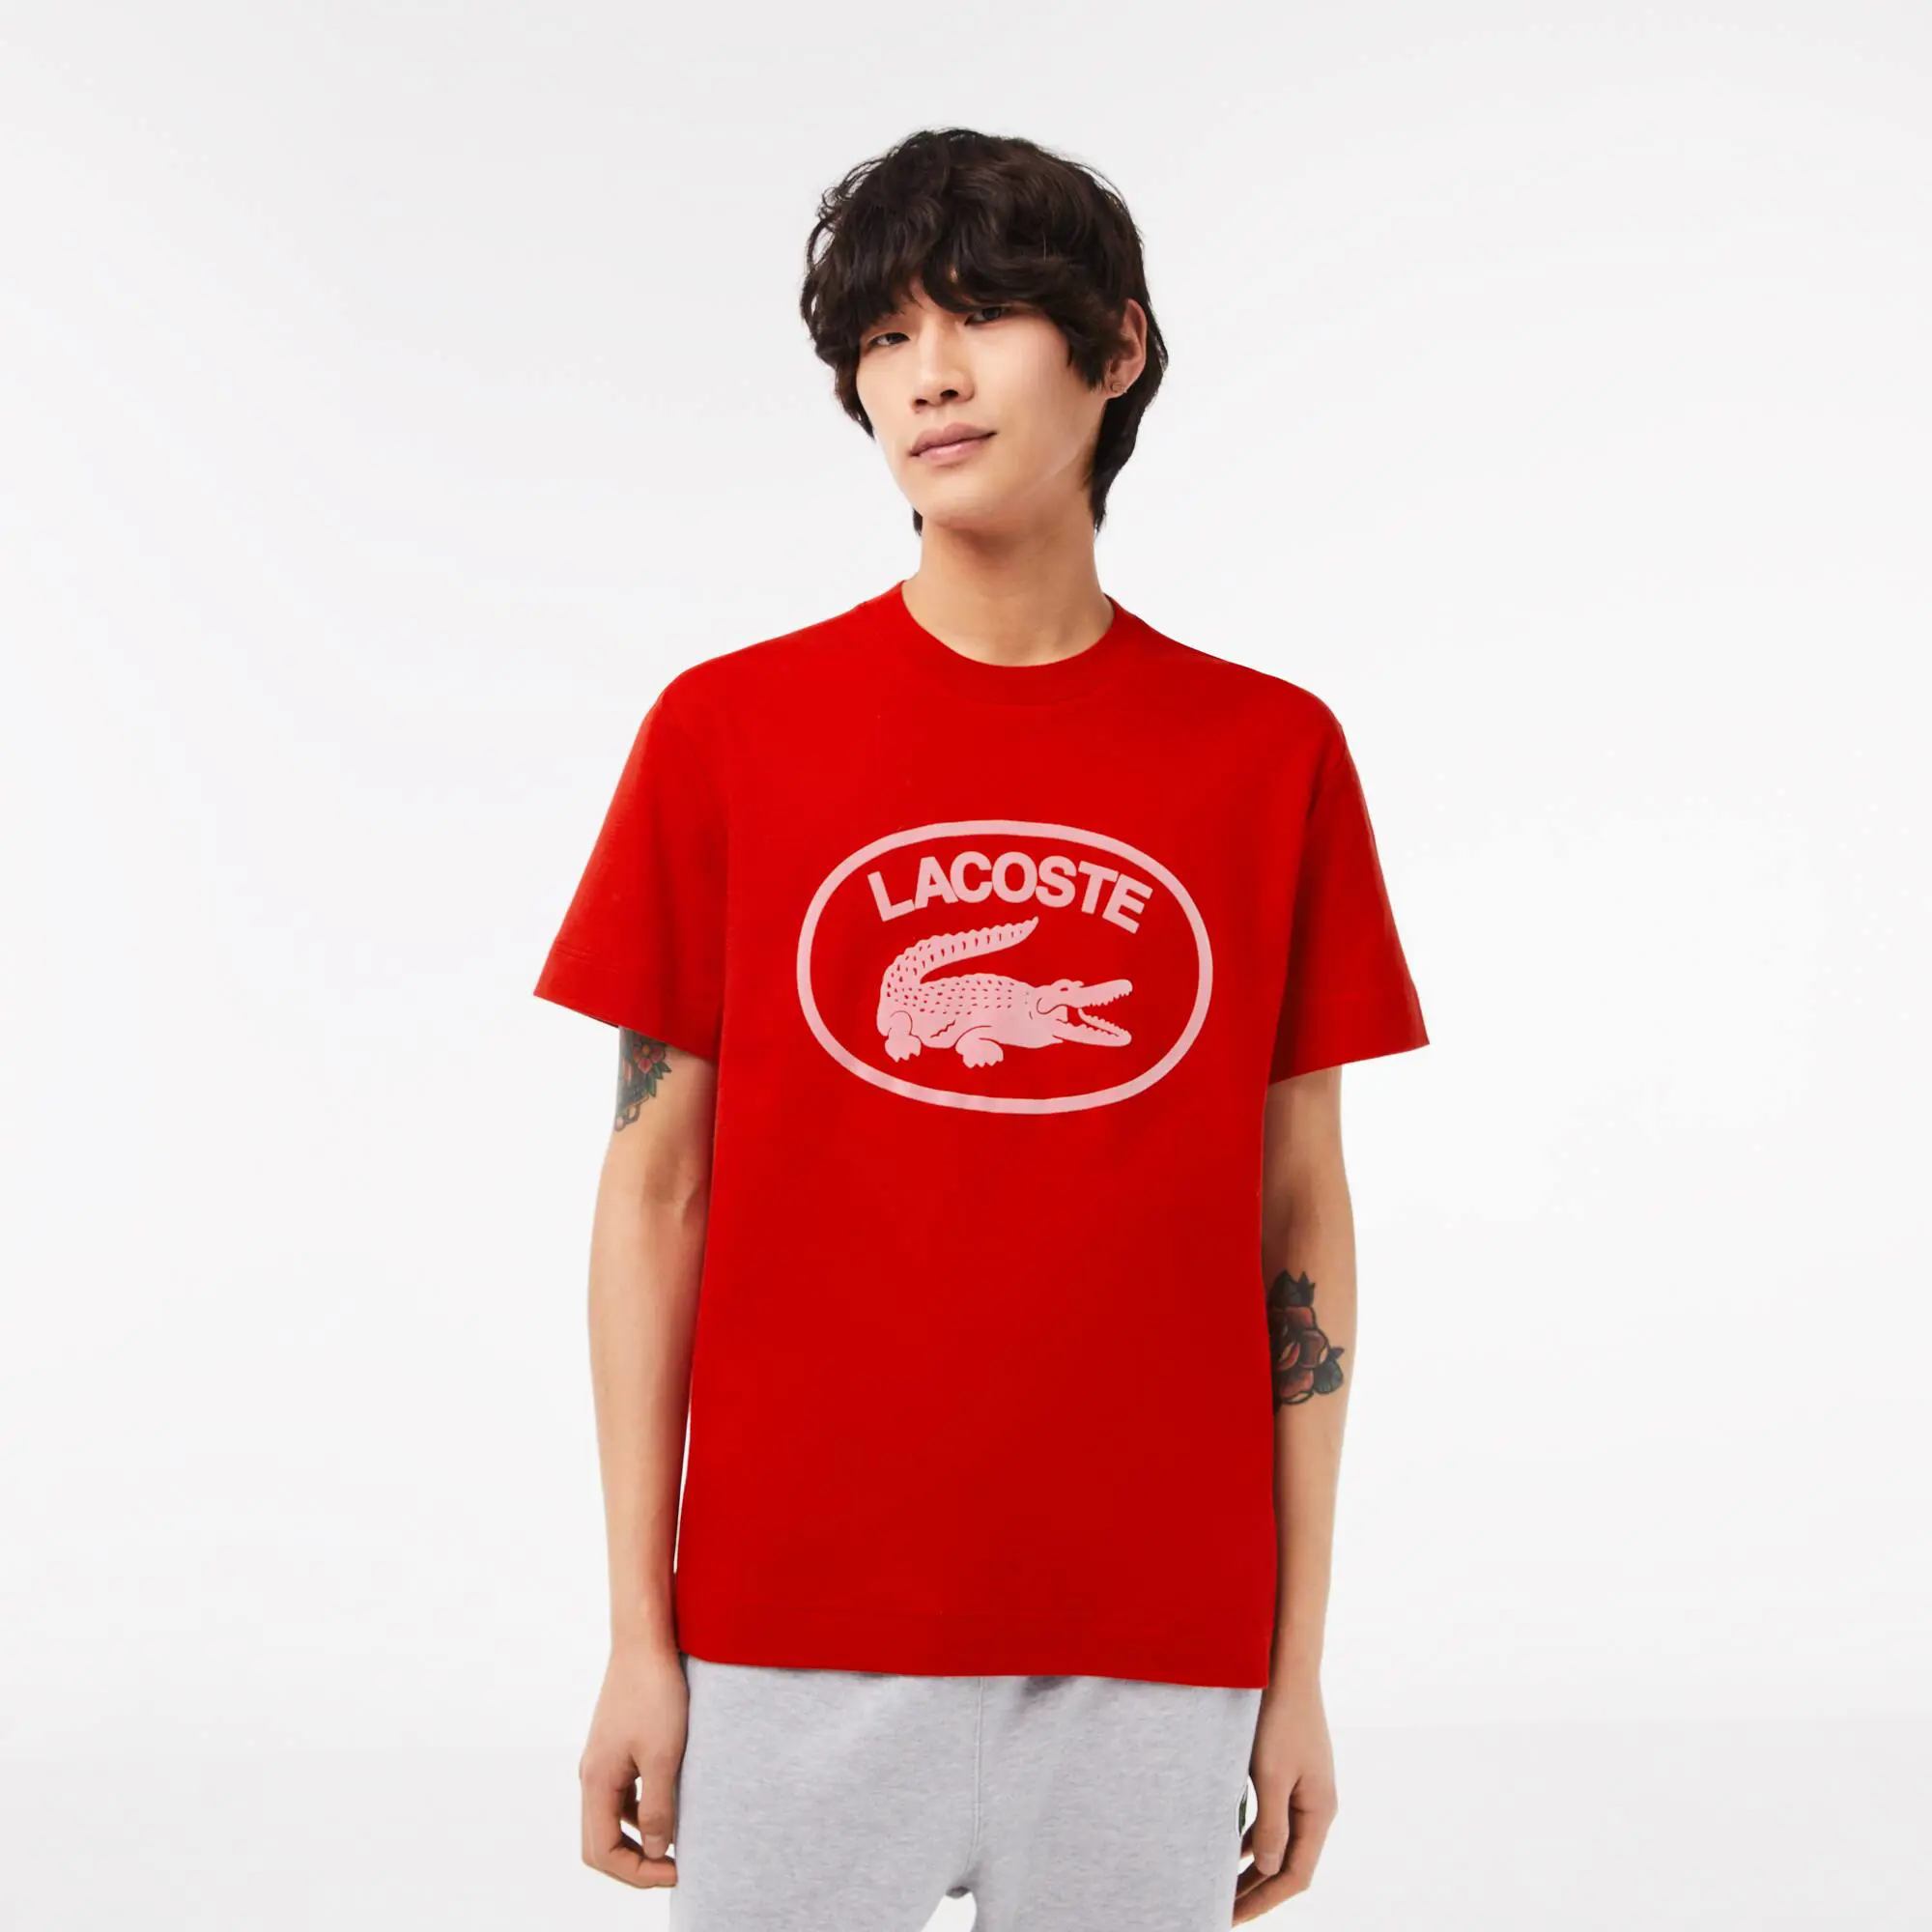 Lacoste Men's Relaxed Fit Branded Cotton T-Shirt. 1